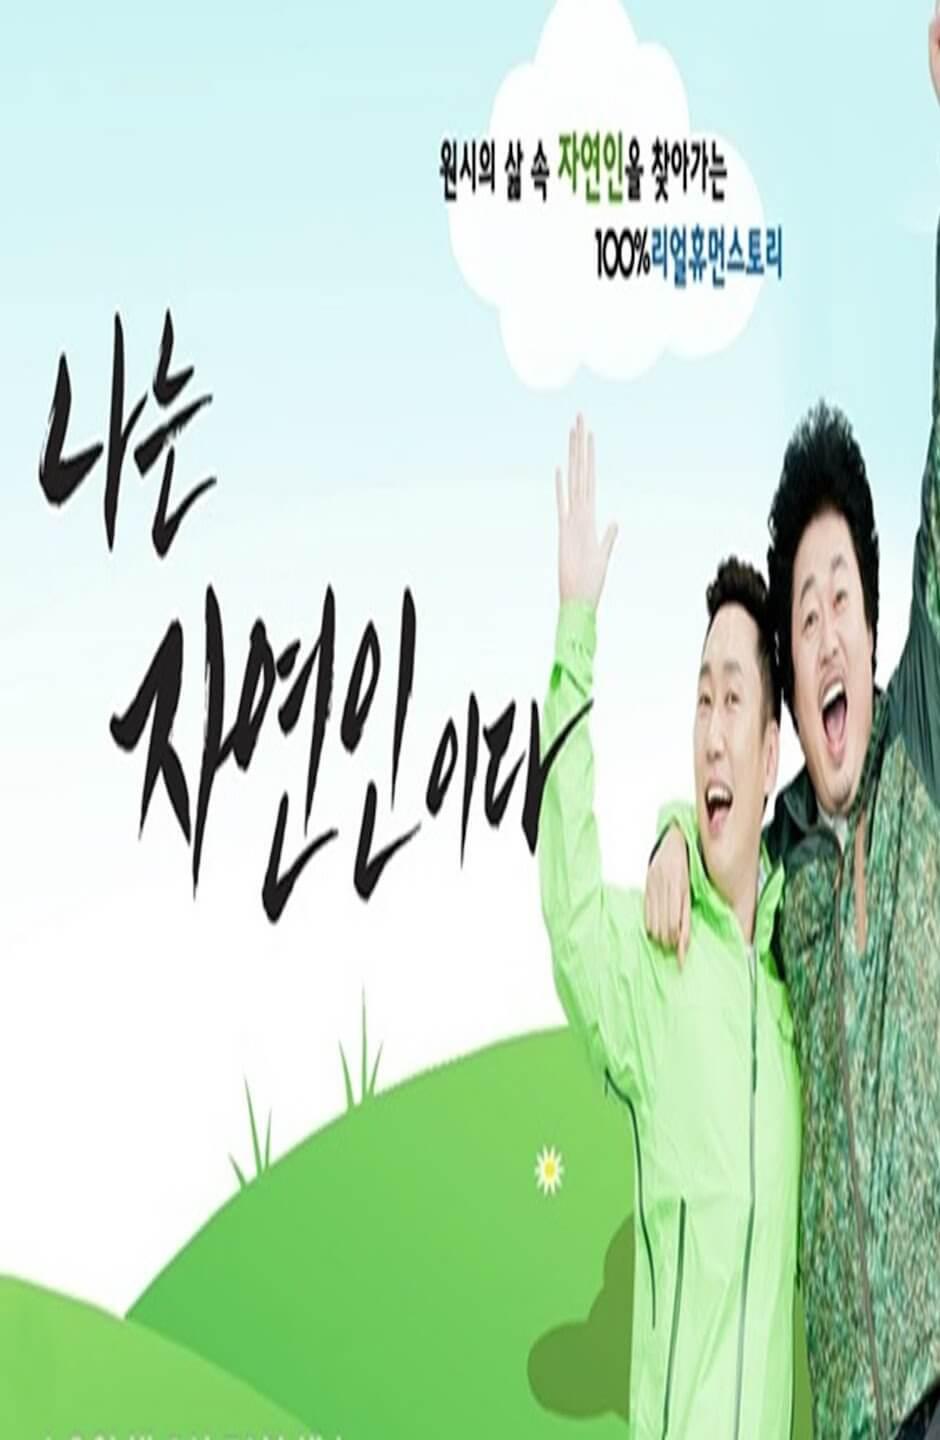 TV ratings for I Am A Natural Person (나는 자연인이다) in South Africa. MBN TV series